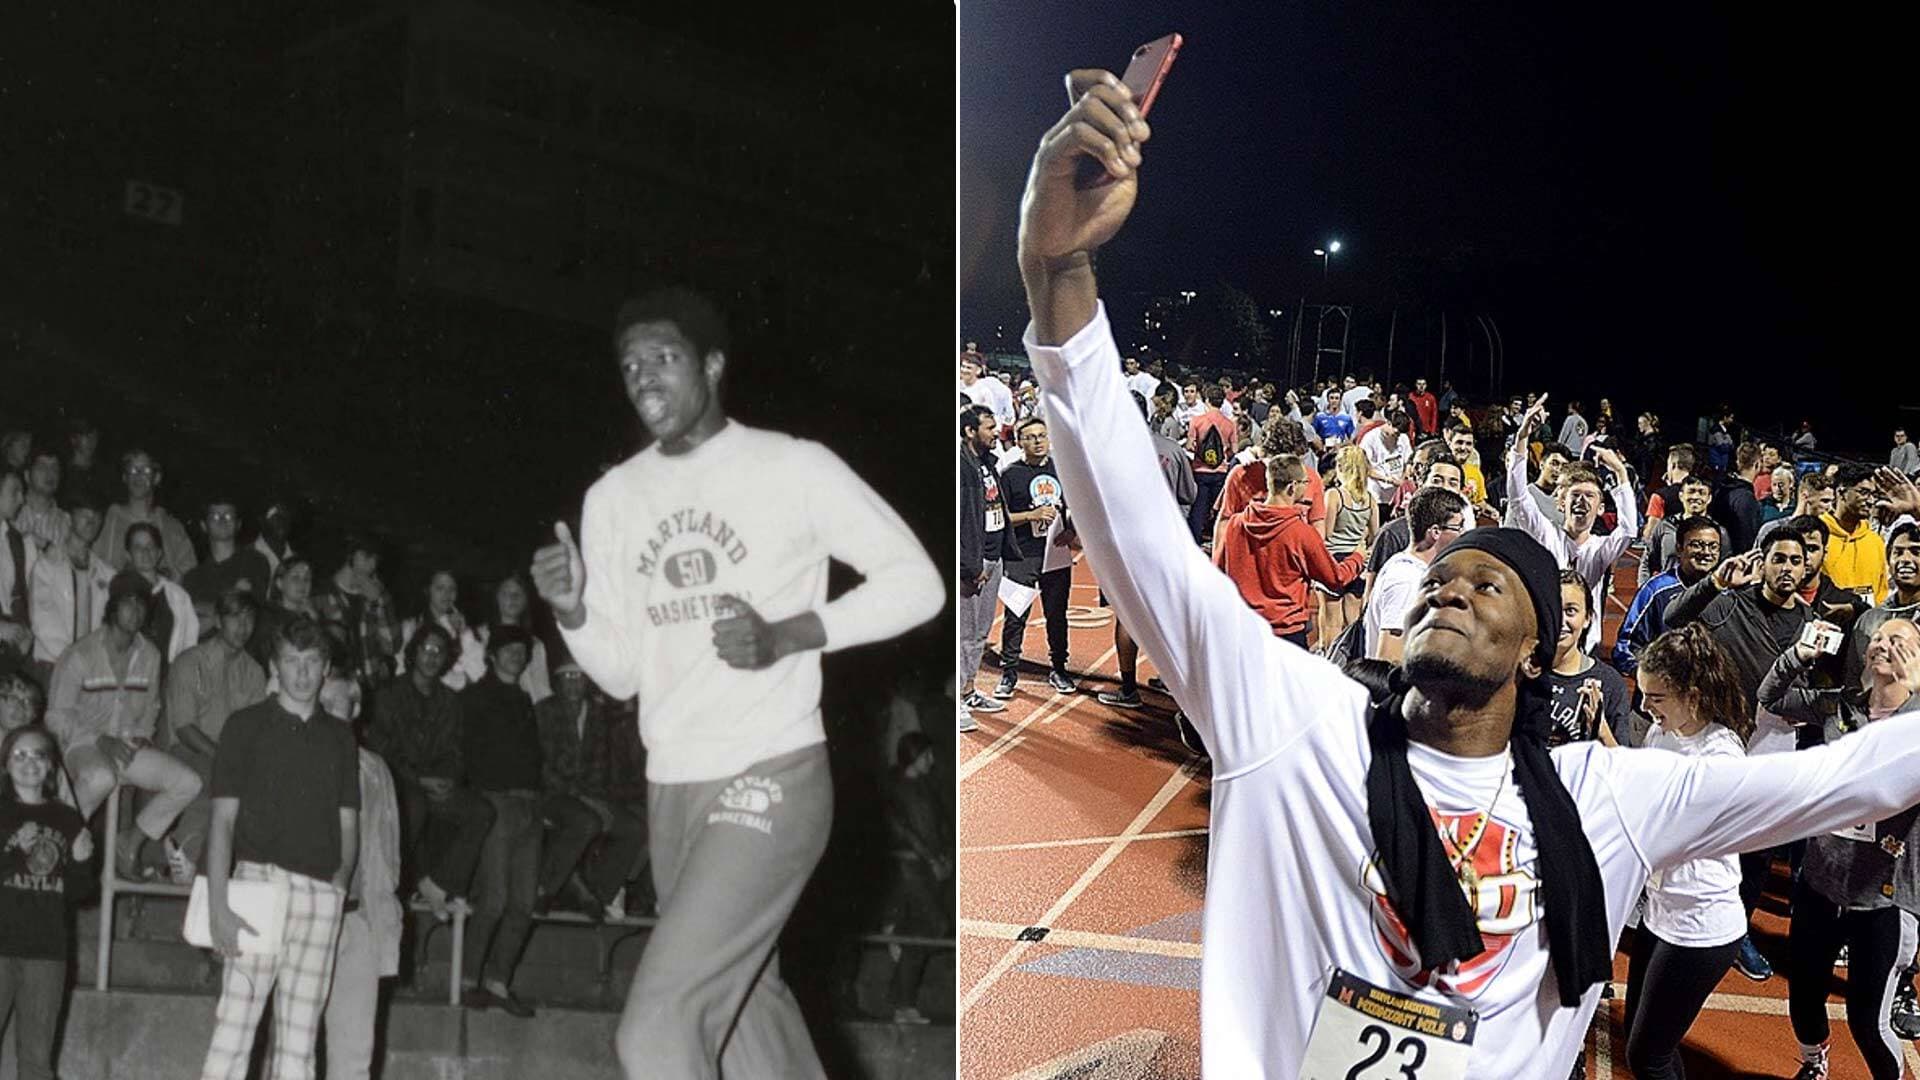 Archival and new pictures of UMD basketball players and fans at the Midnight Mile